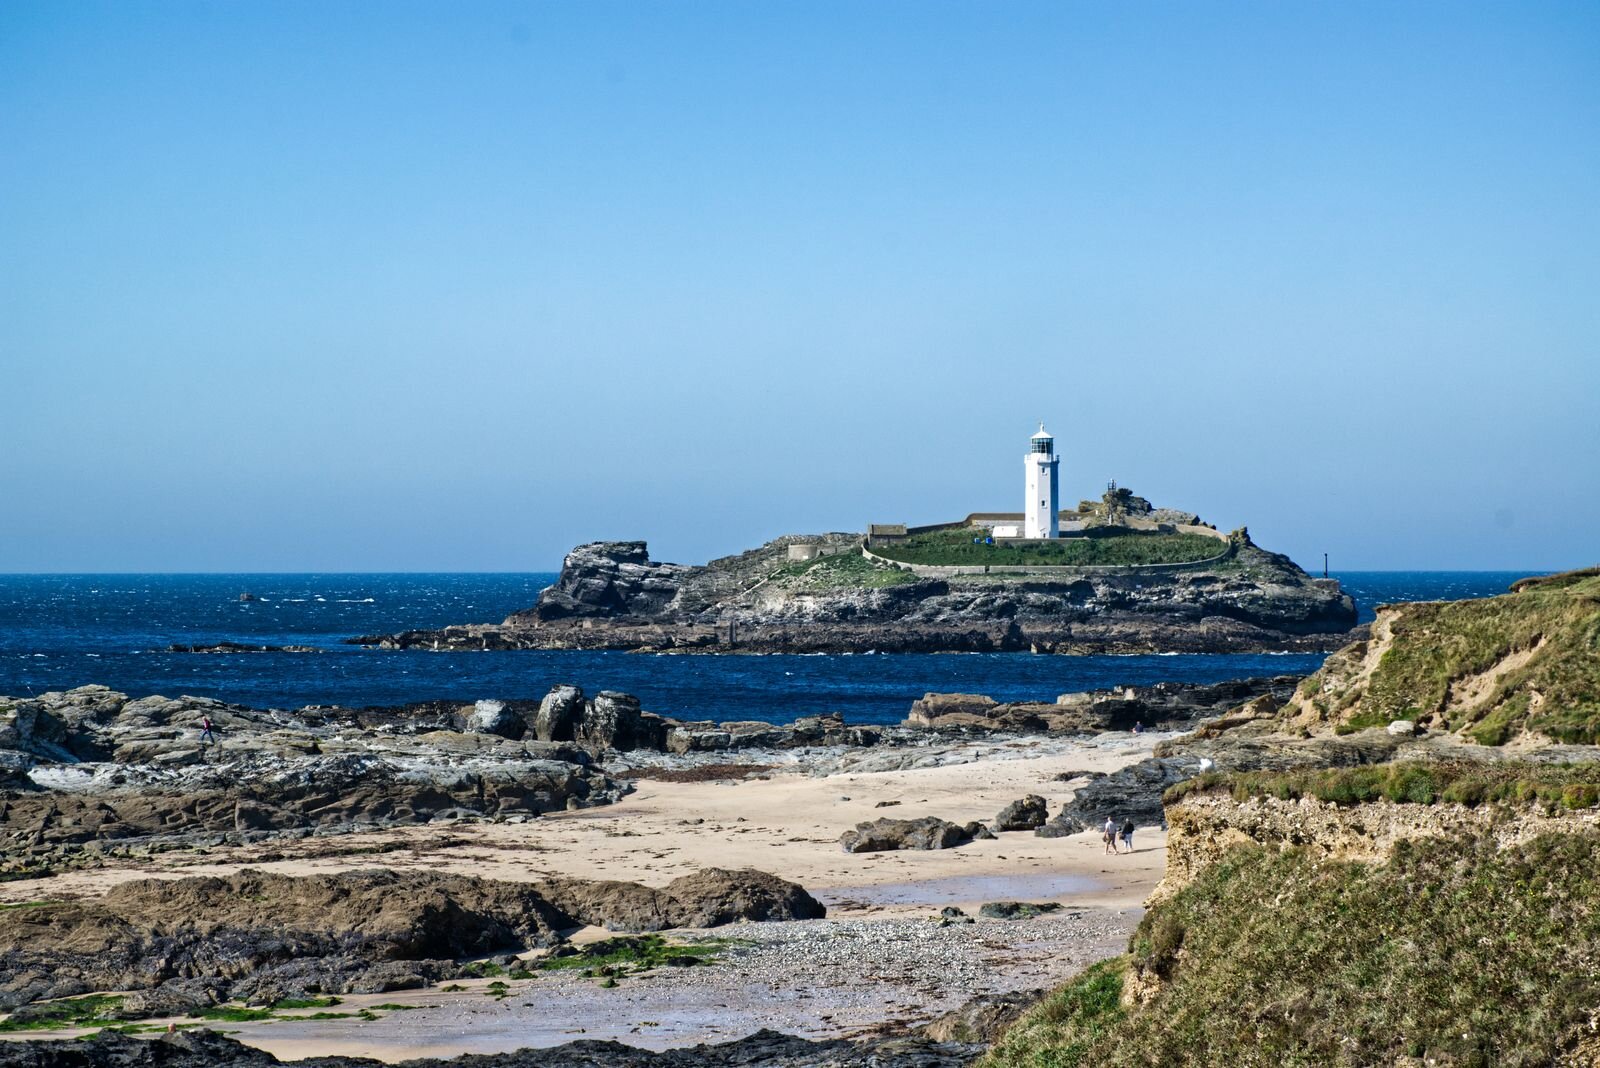 Godrevy Beach and Lighthouse - Photo by keith davey on Unsplash